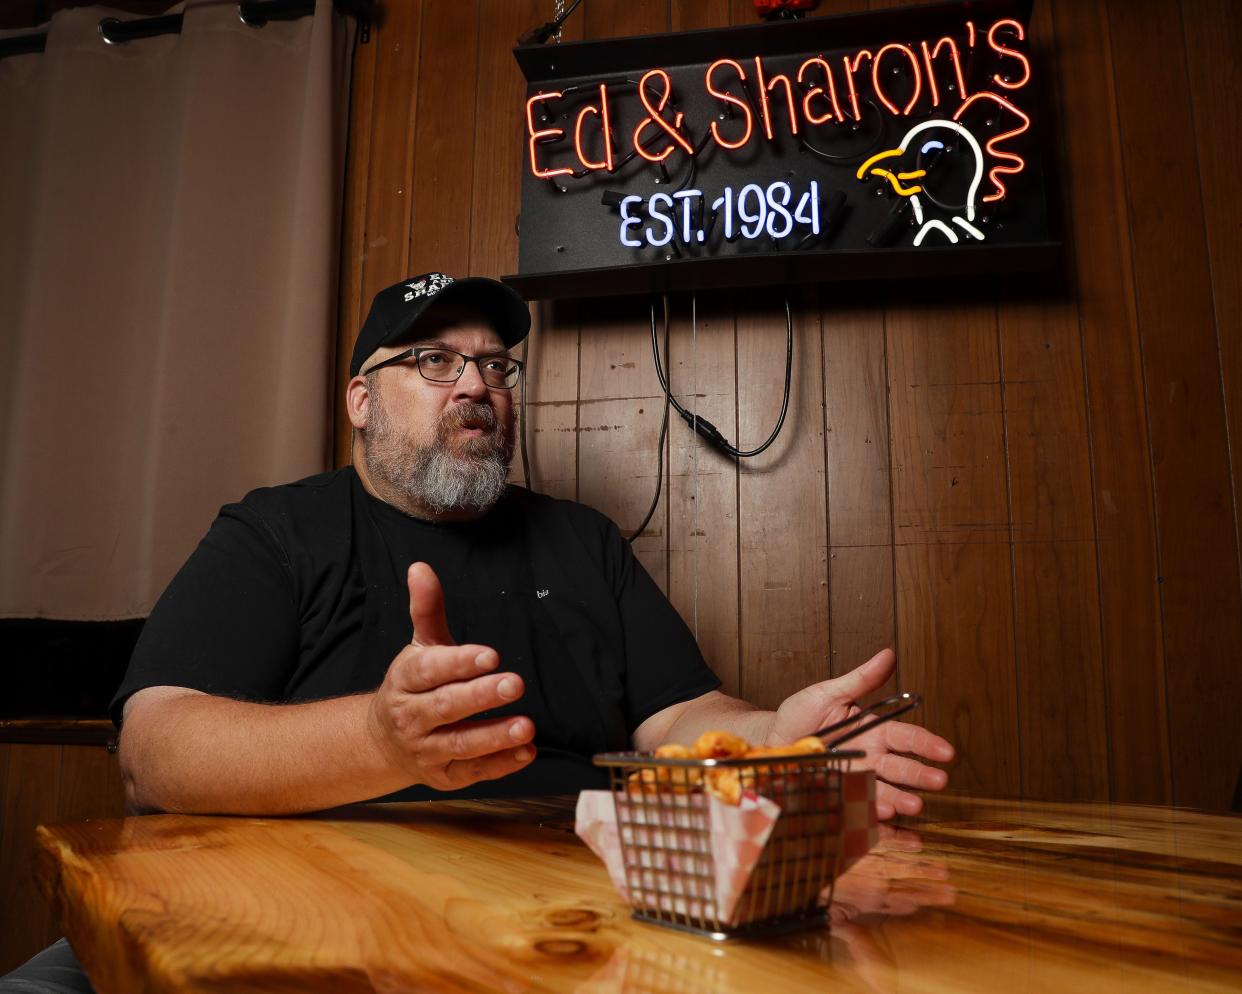 Bill Dinges talks about his Better than "State Fair" Curds, which he sells both commercially and wholesale, at Ed & Sharon's Restaurant and Catering outside Merrill.